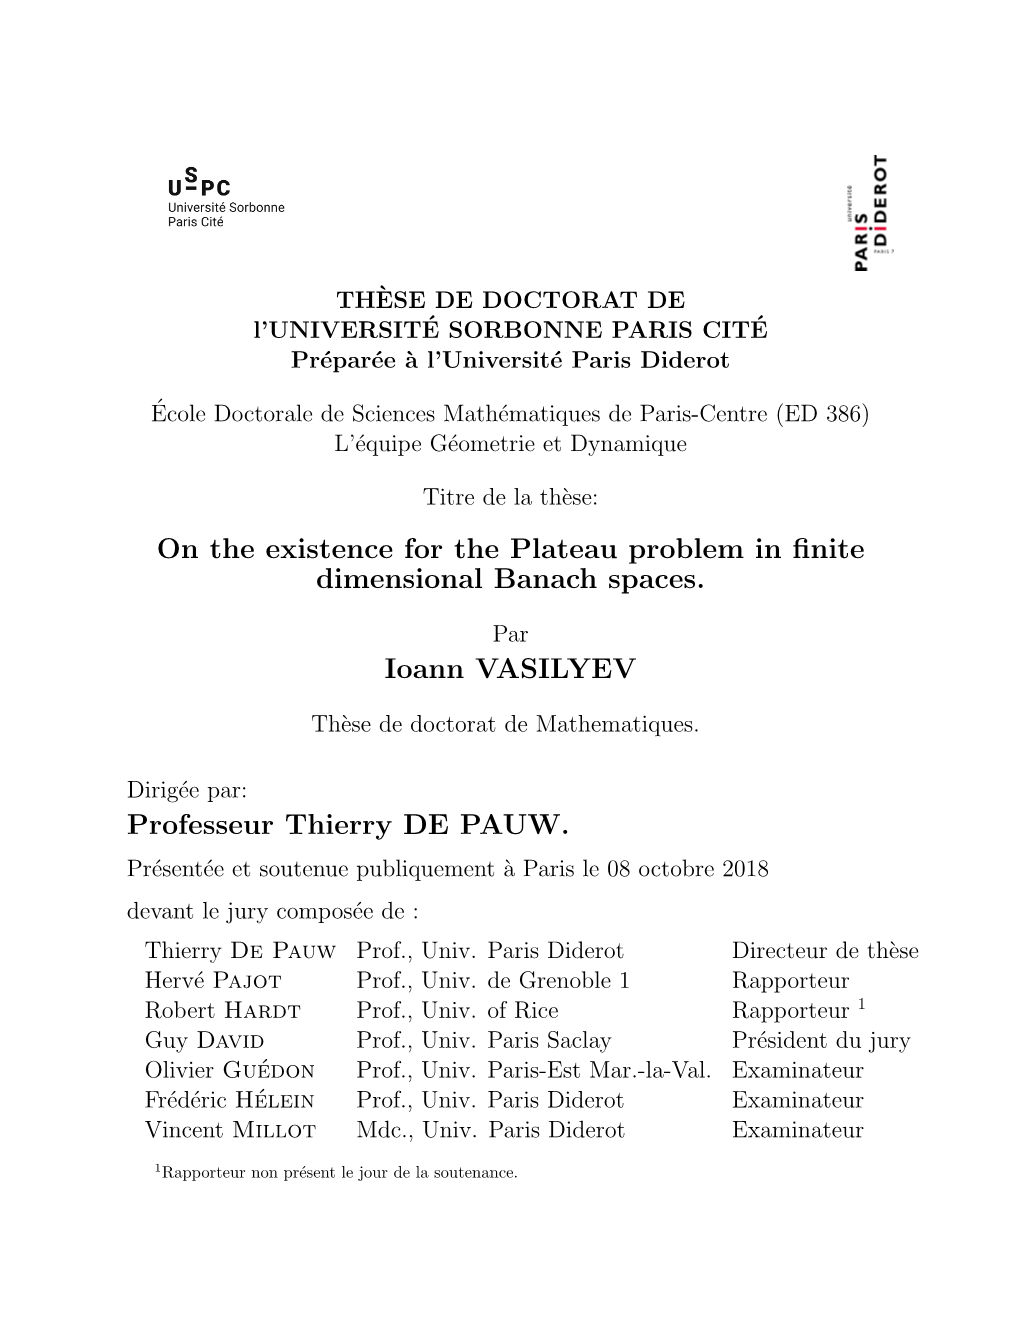 On the Existence for the Plateau Problem in Finite Dimensional Banach Spaces. Ioann VASILYEV Professeur Thierry DE PAUW